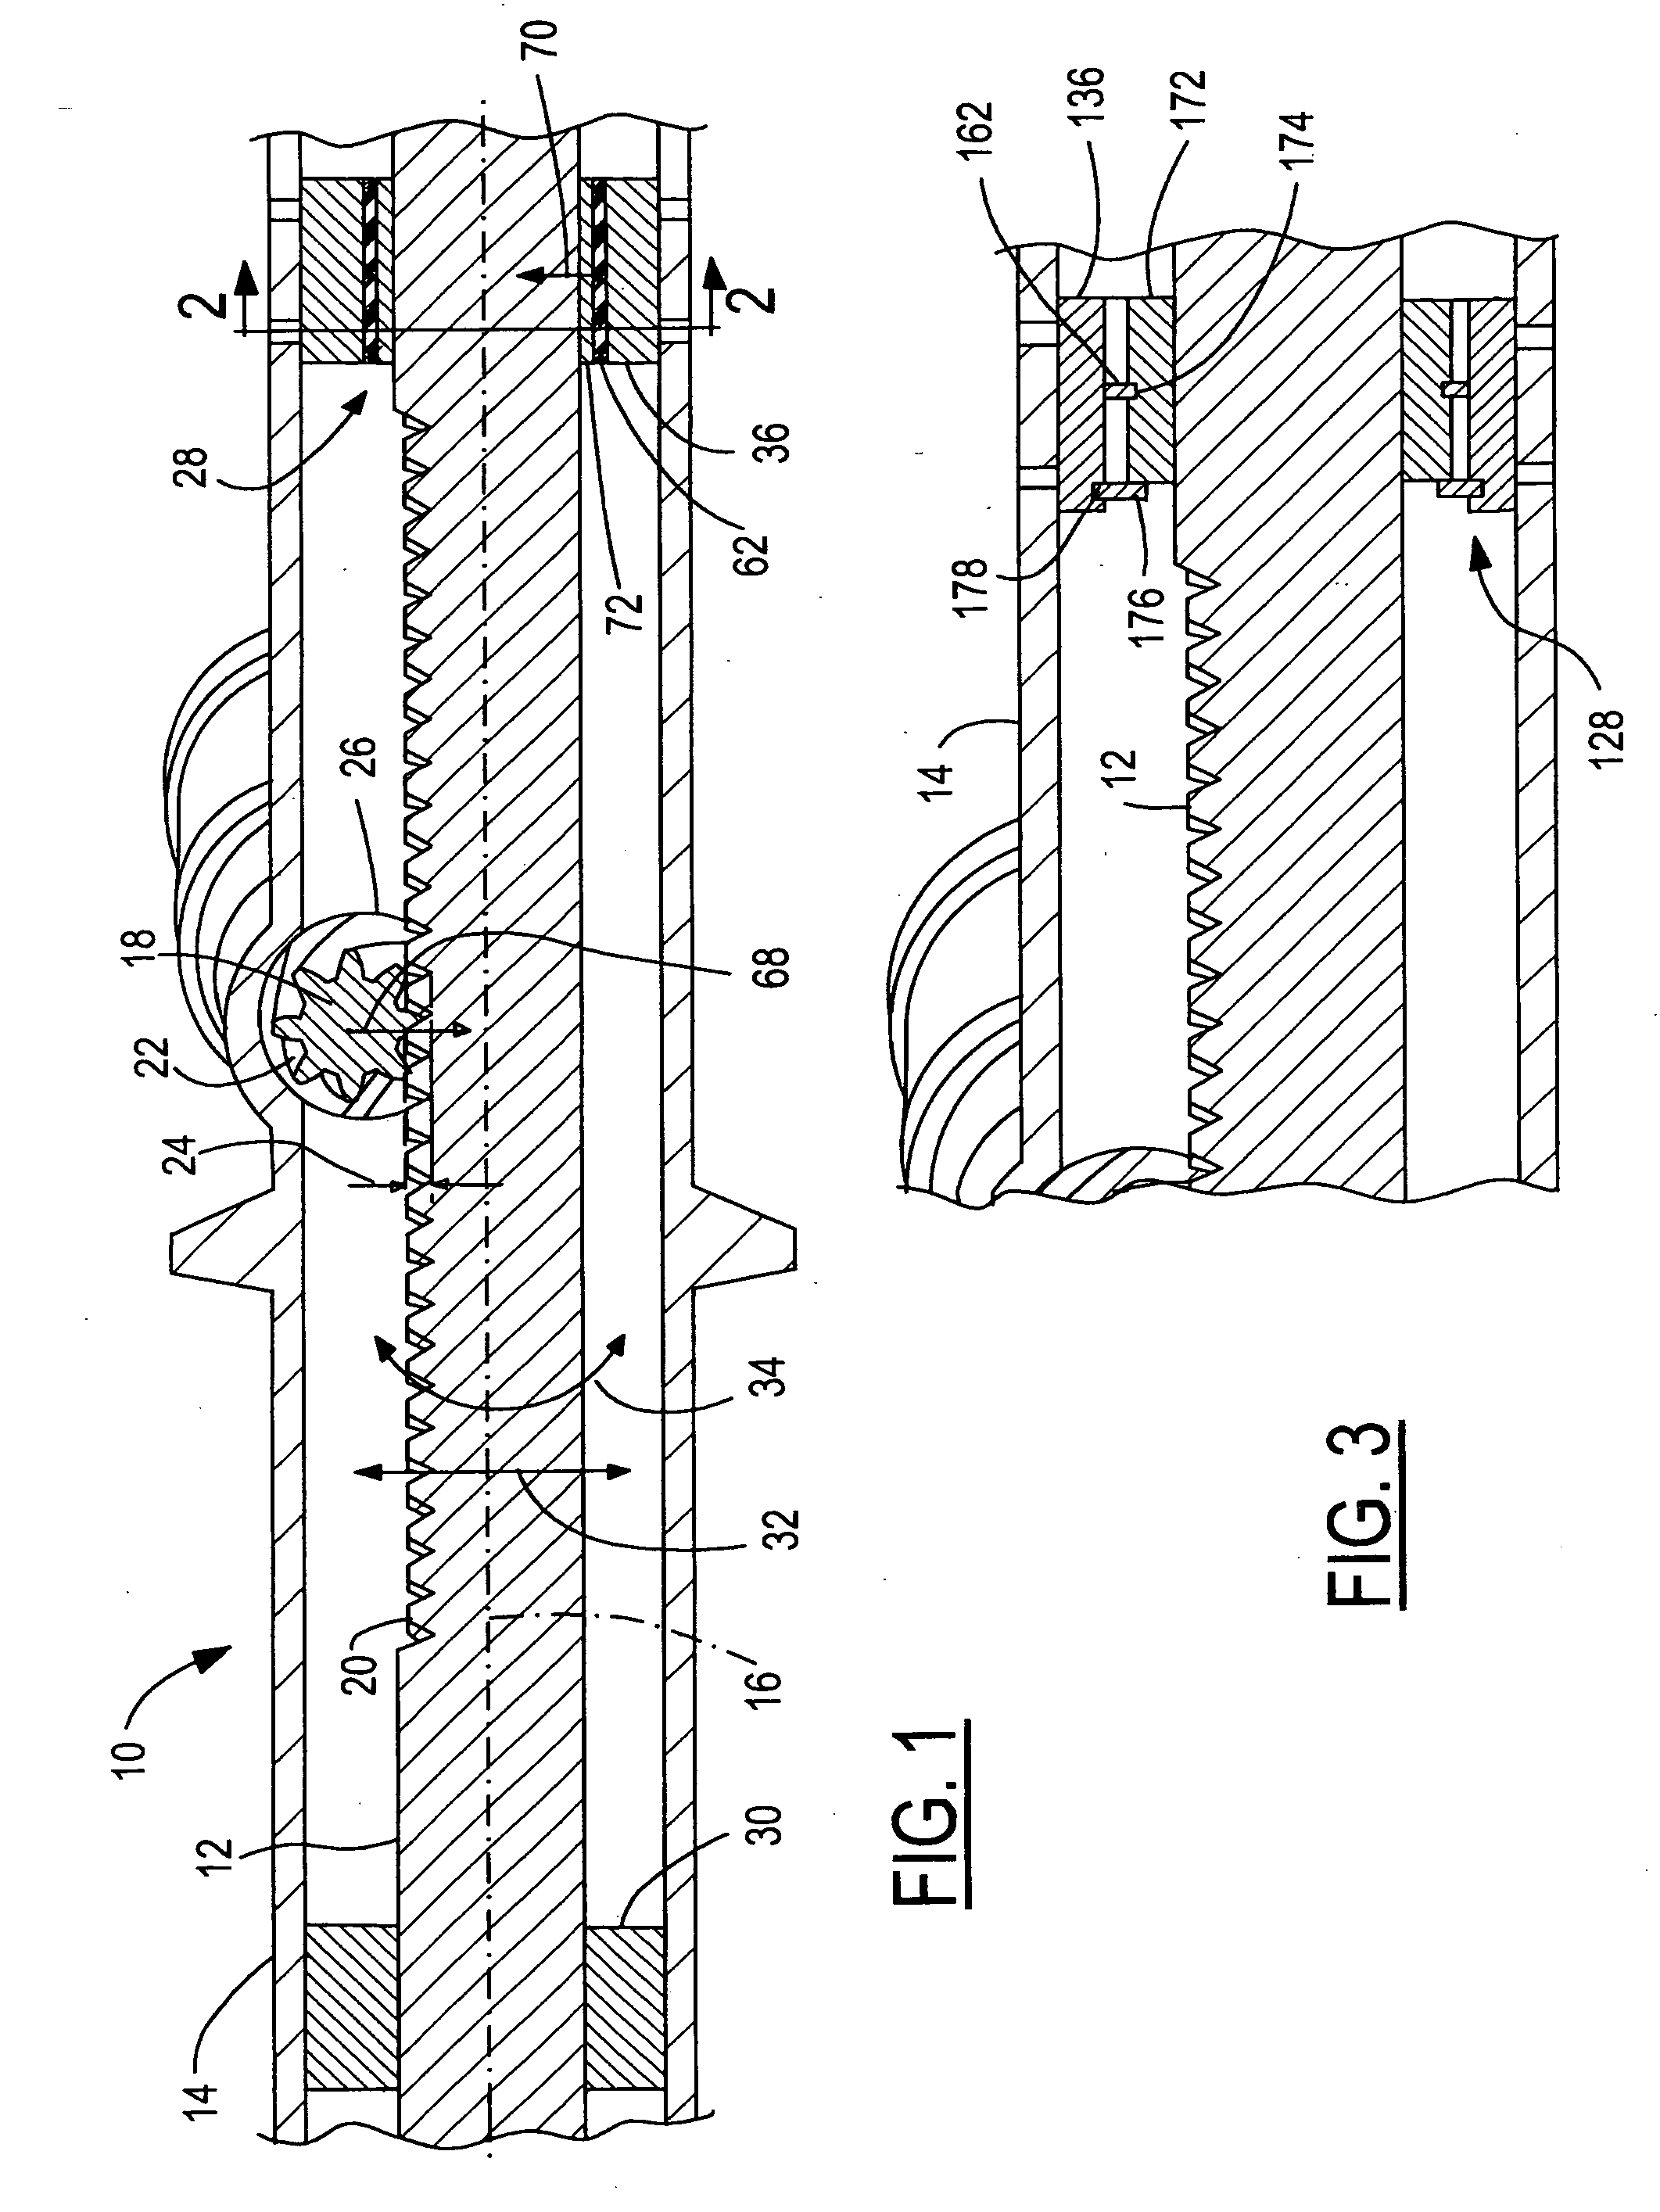 Mesh control for a rack and pinion steering system